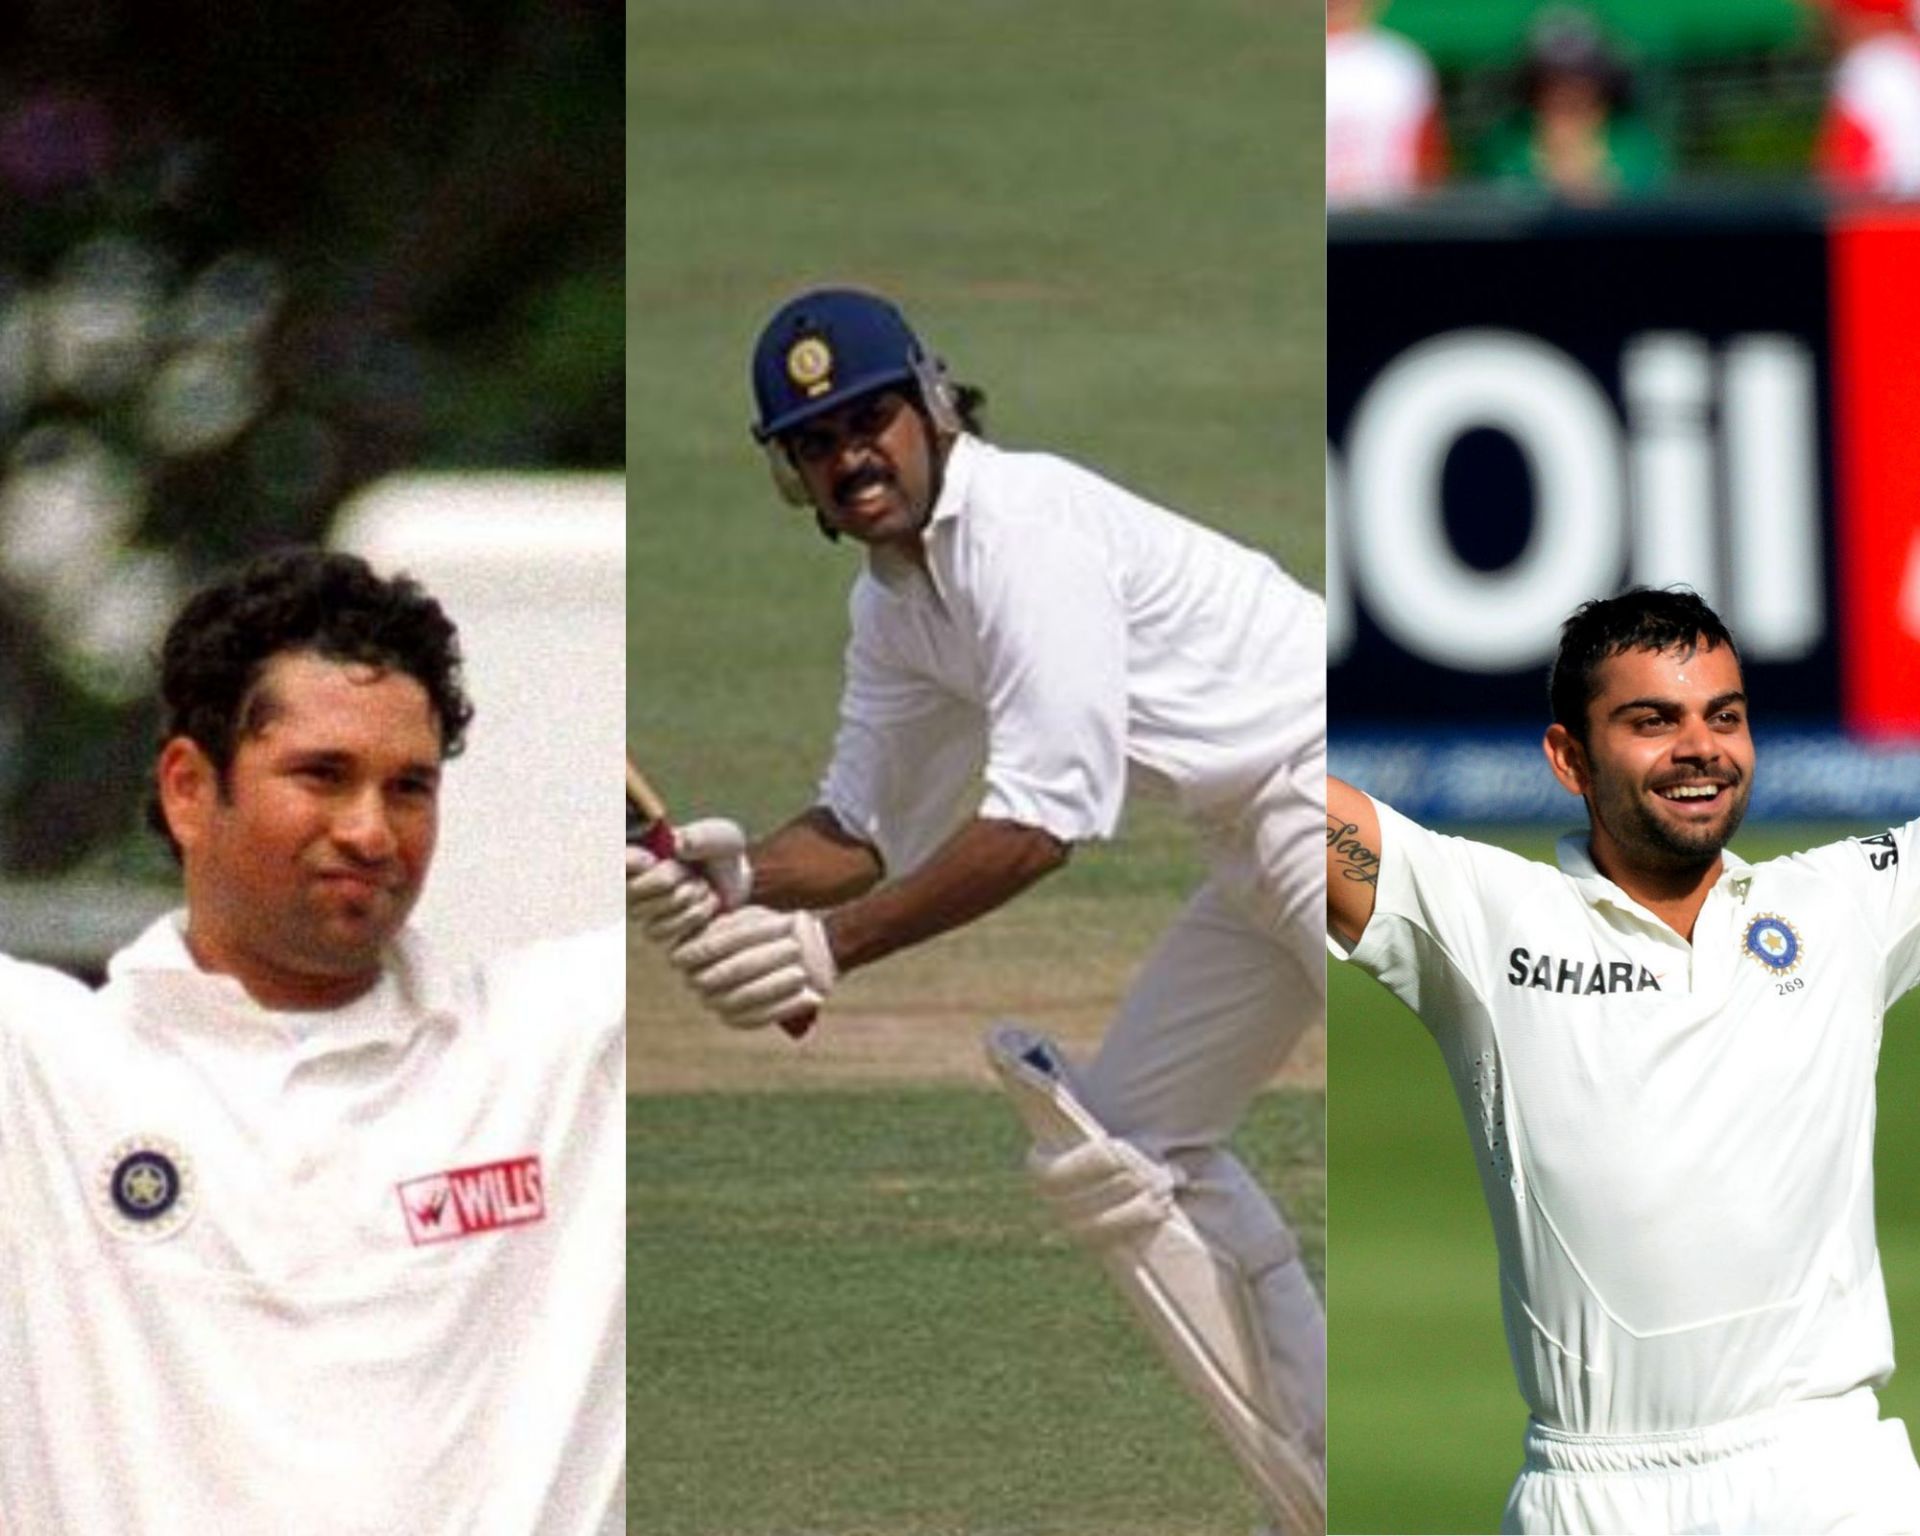 Best knocks played by Indians in South Africa